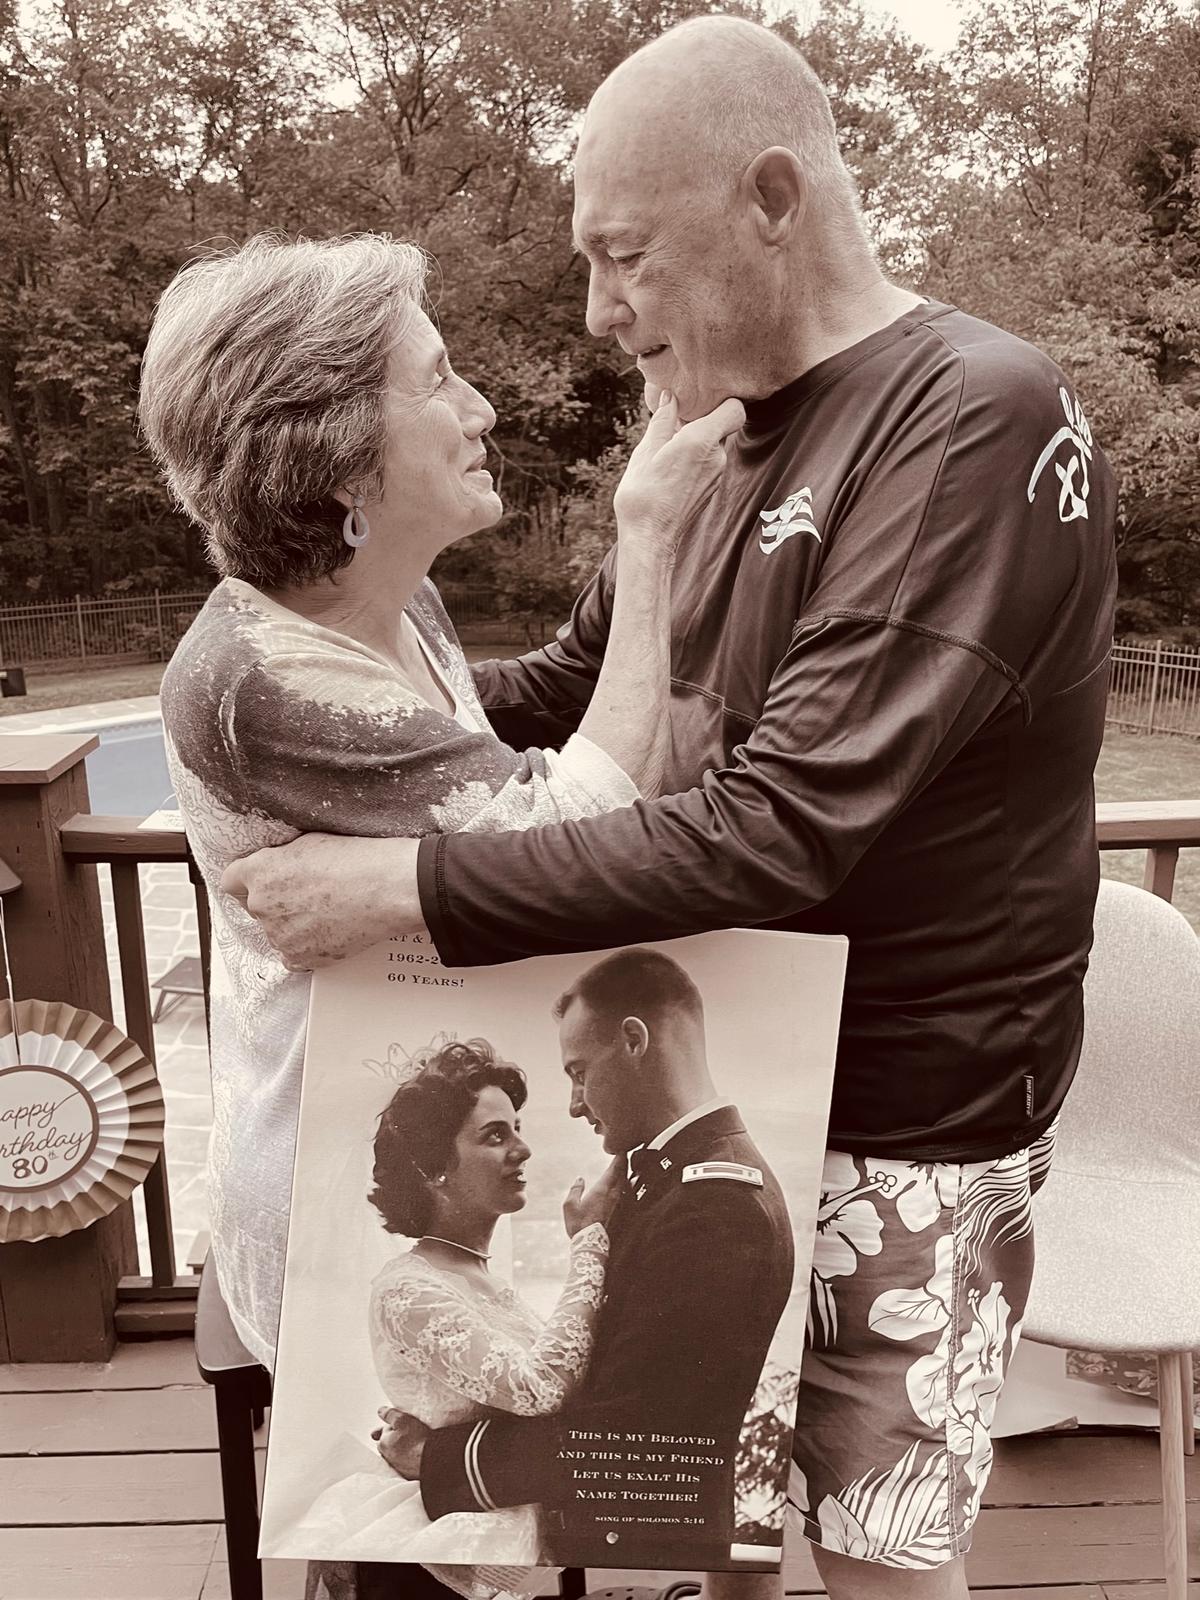 Karen and Arthur Brown got married on June 9, 1962. The couple first met each other on Memorial Day 1957. (Courtesy of <a href="https://www.tiktok.com/@sydneygbrown">Sydney Brown</a>)